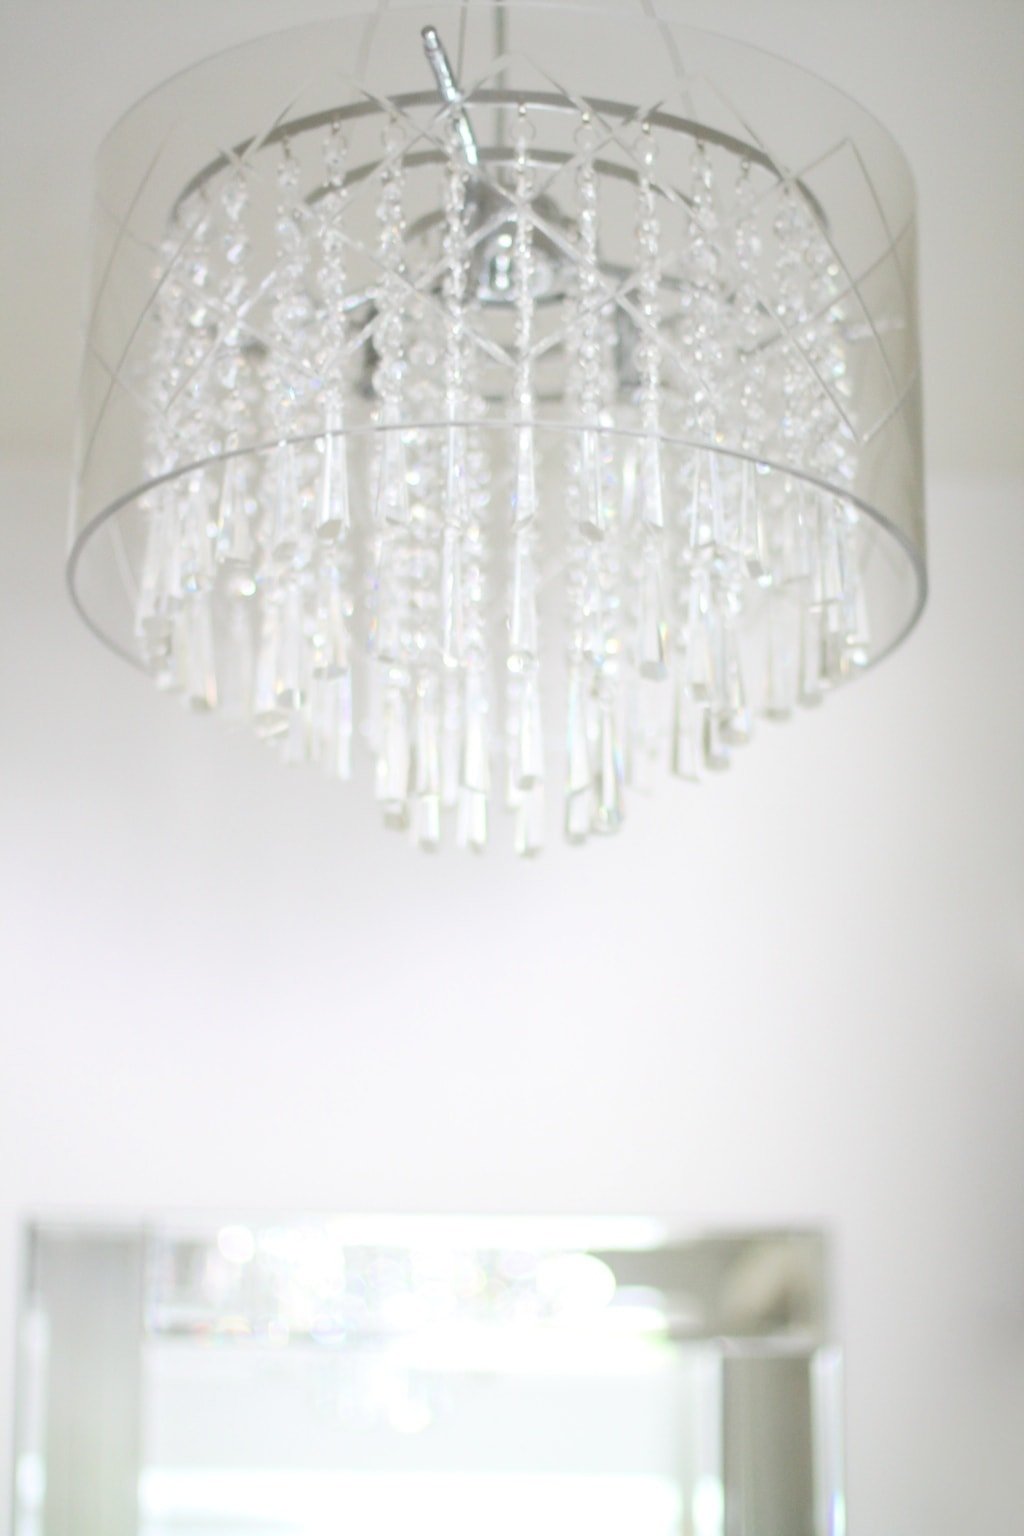 A bright glamorous silver chandelier inside a closet.